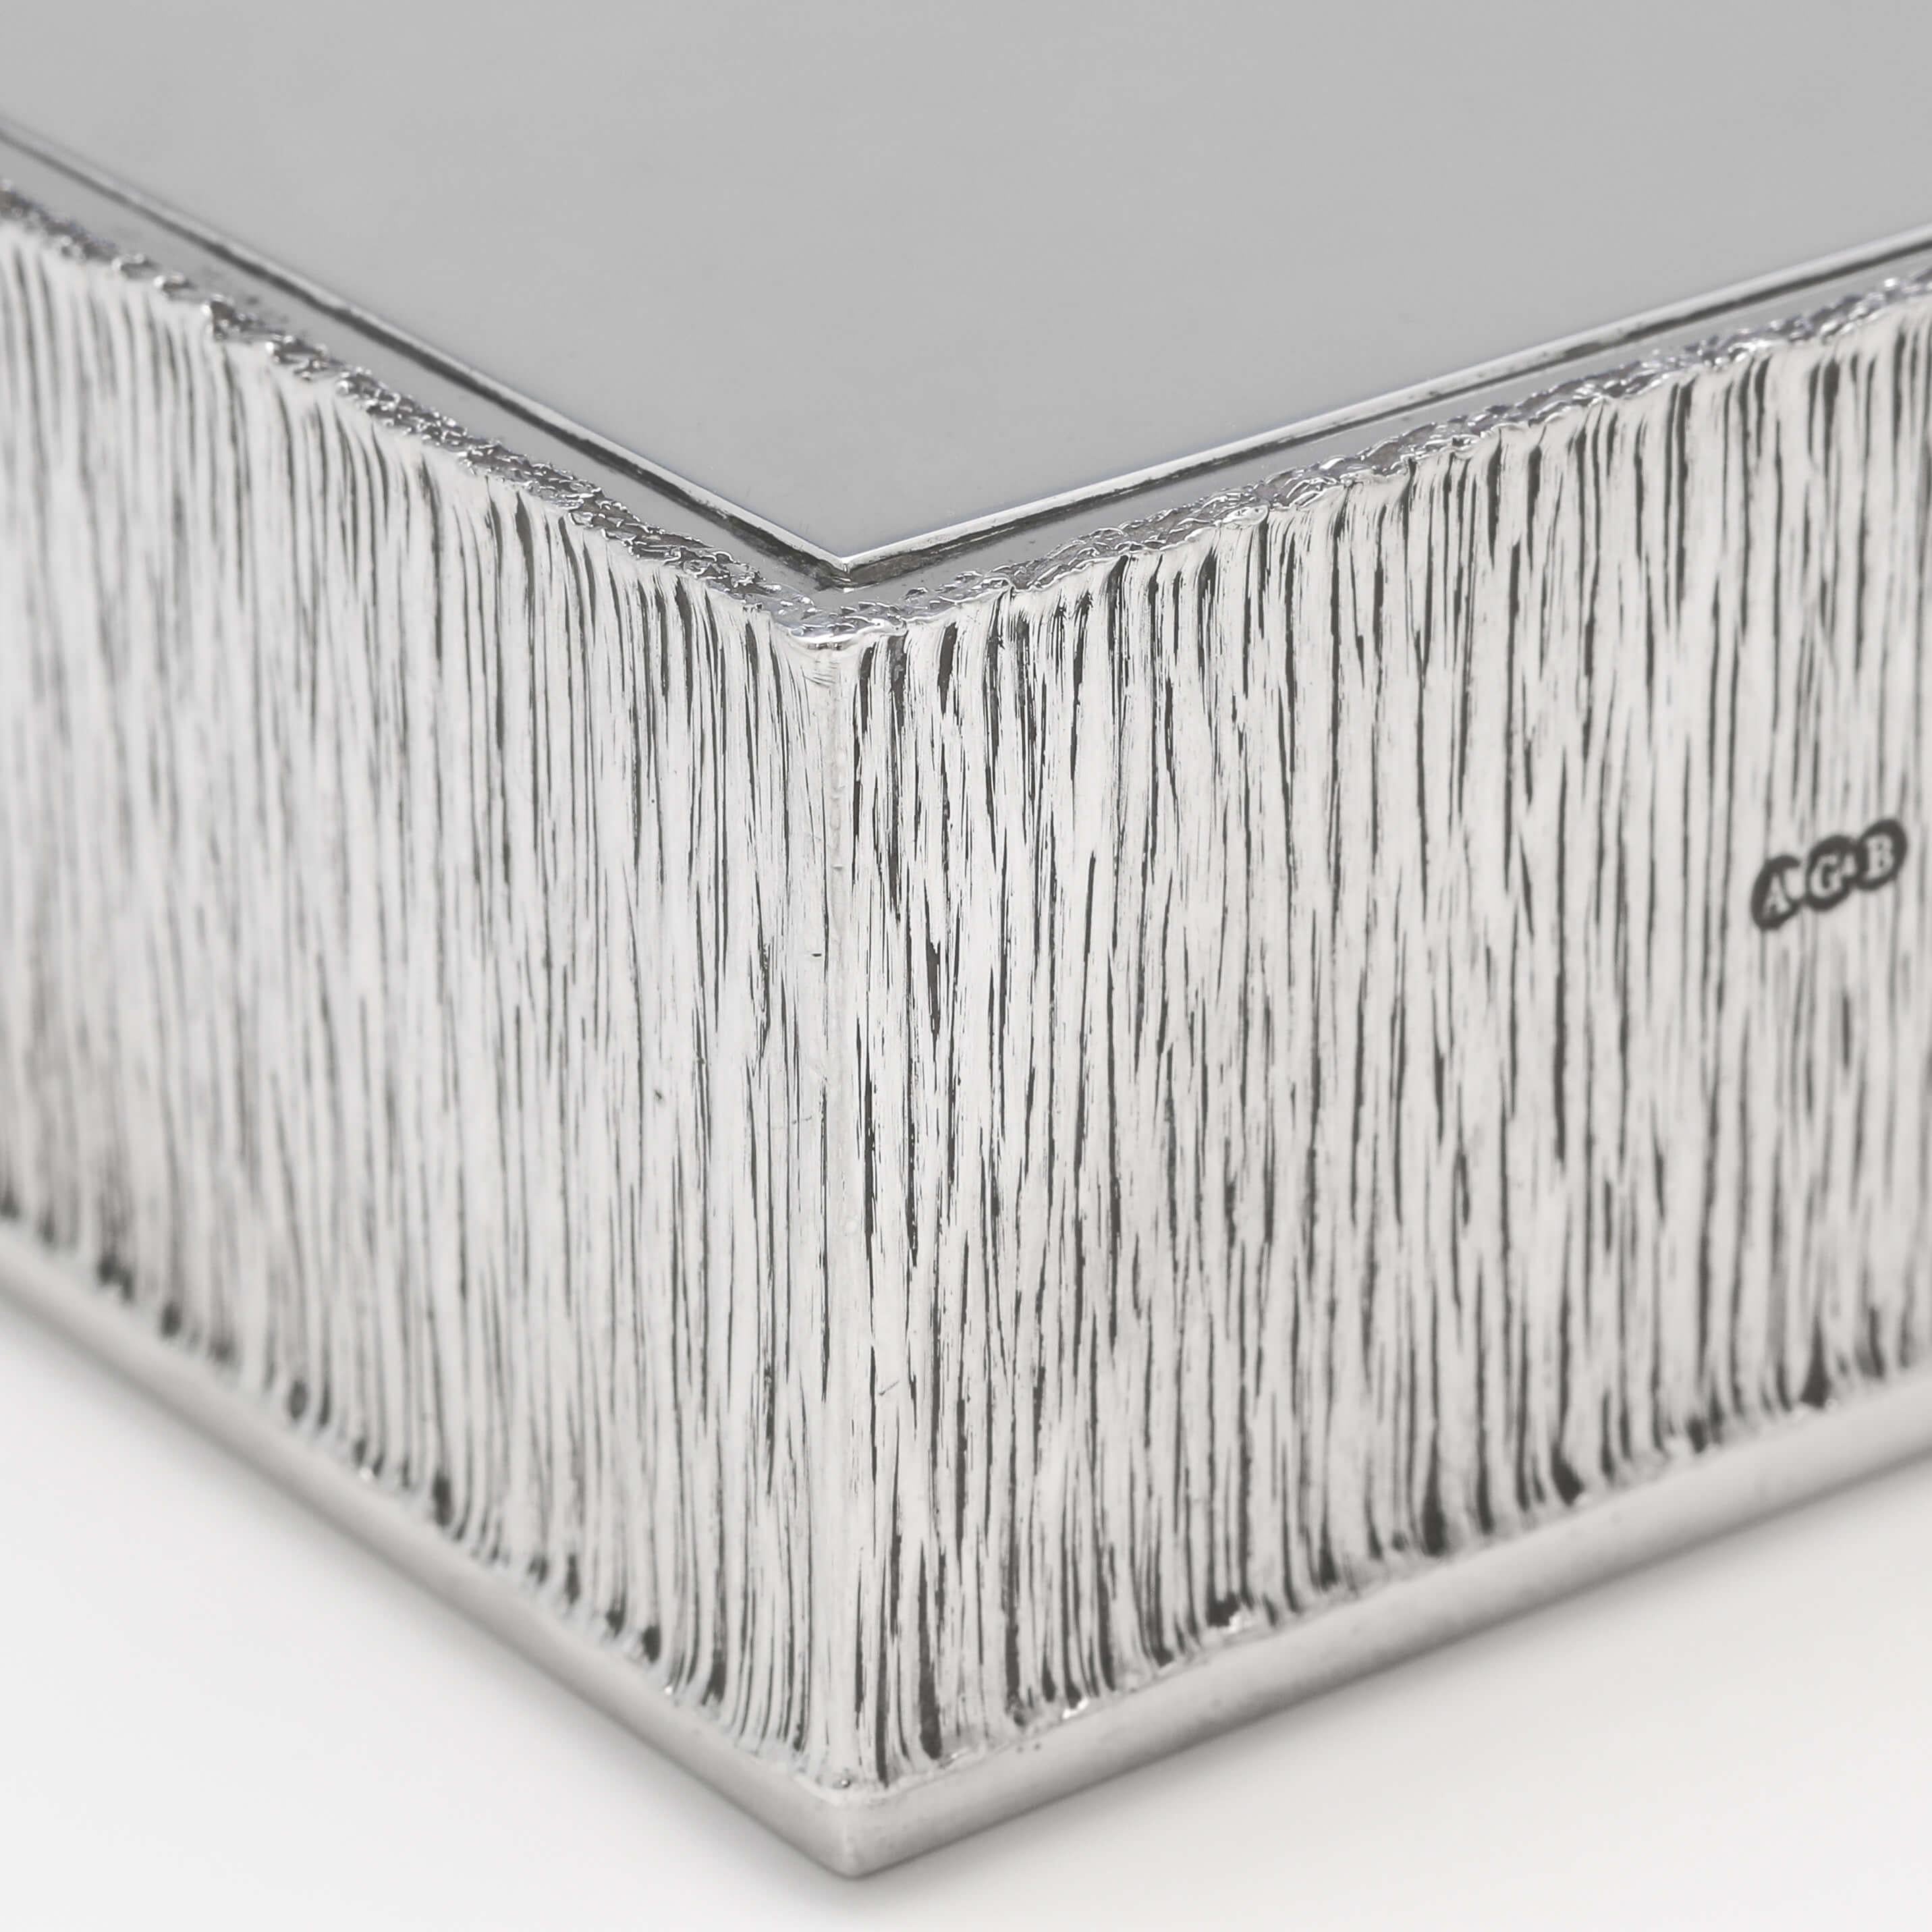 Late 20th Century Mid-Century Modern Sterling Silver Bridge Box by Gerald Benney, London, 1970 For Sale